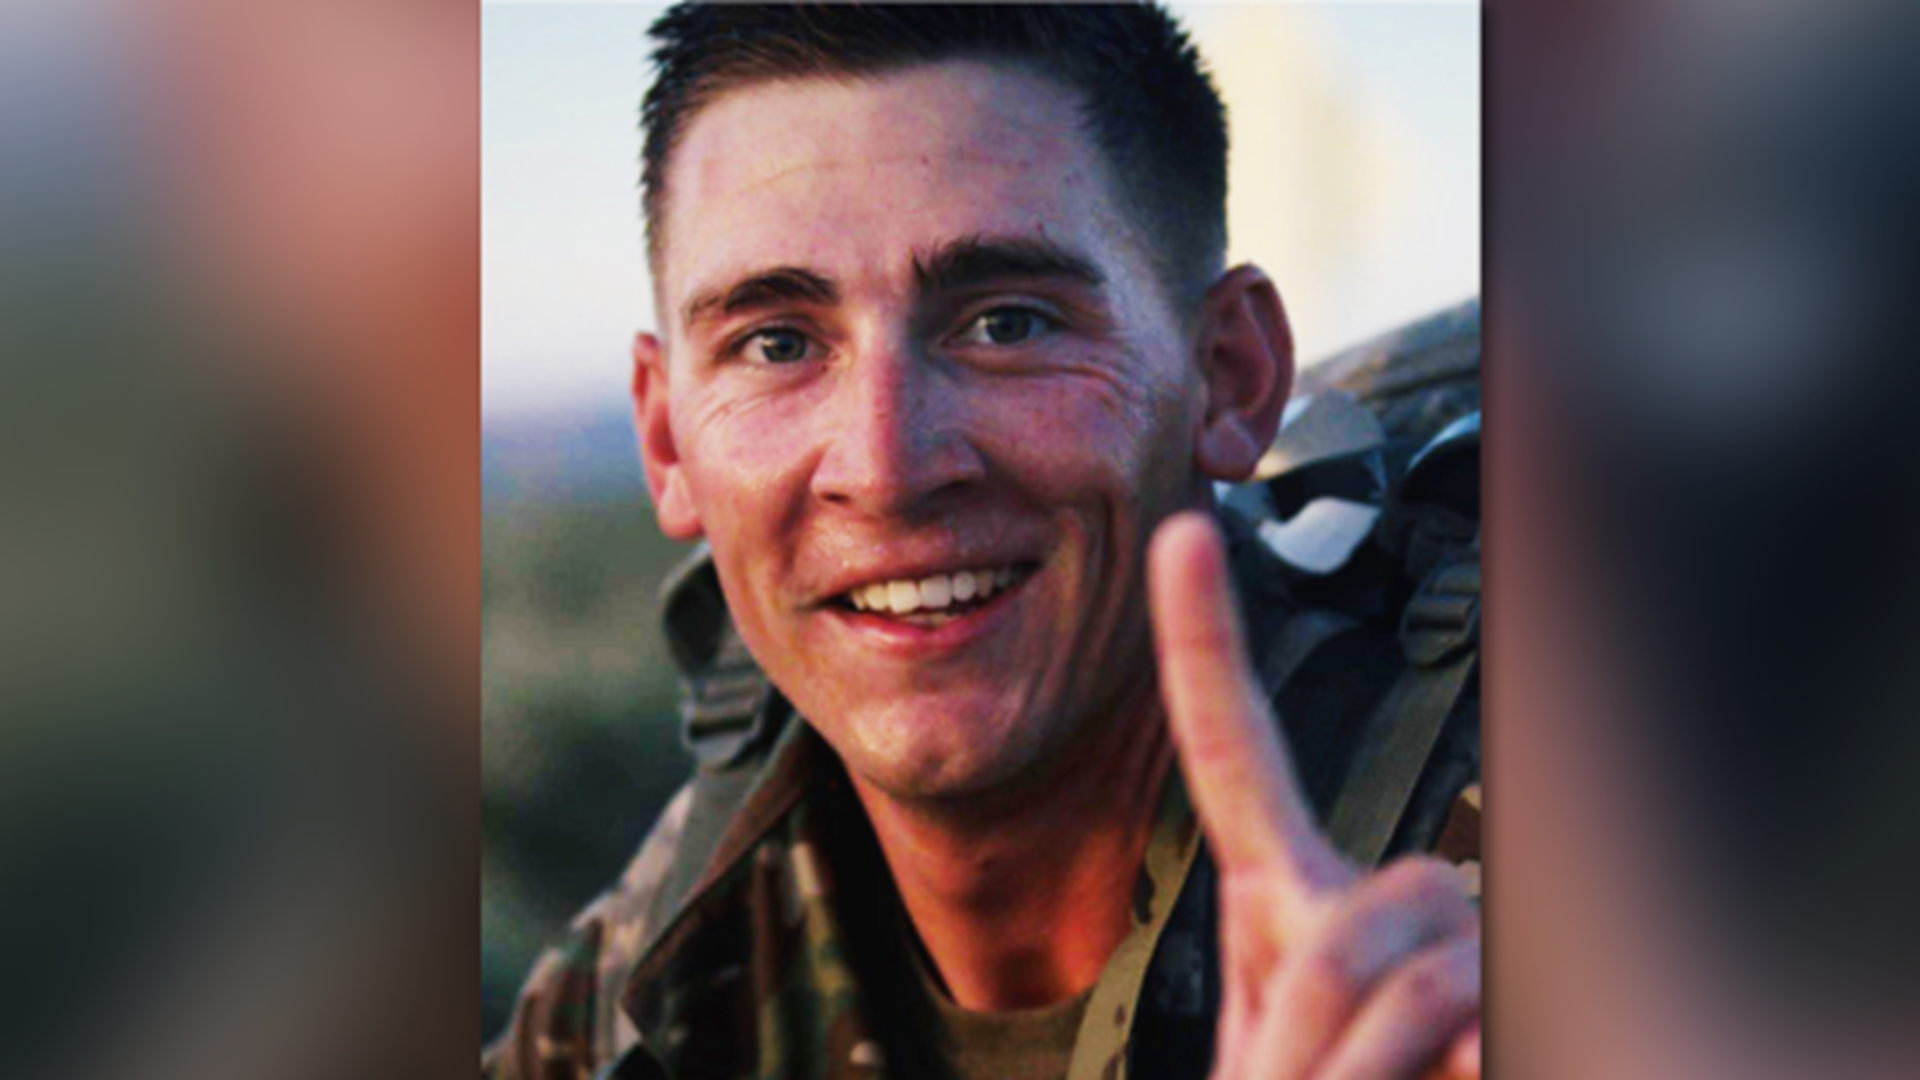 Funeral arrangements have been set for SSG. Kelton Ray Sphaler, who died after a canoe accident on Lake Belton.